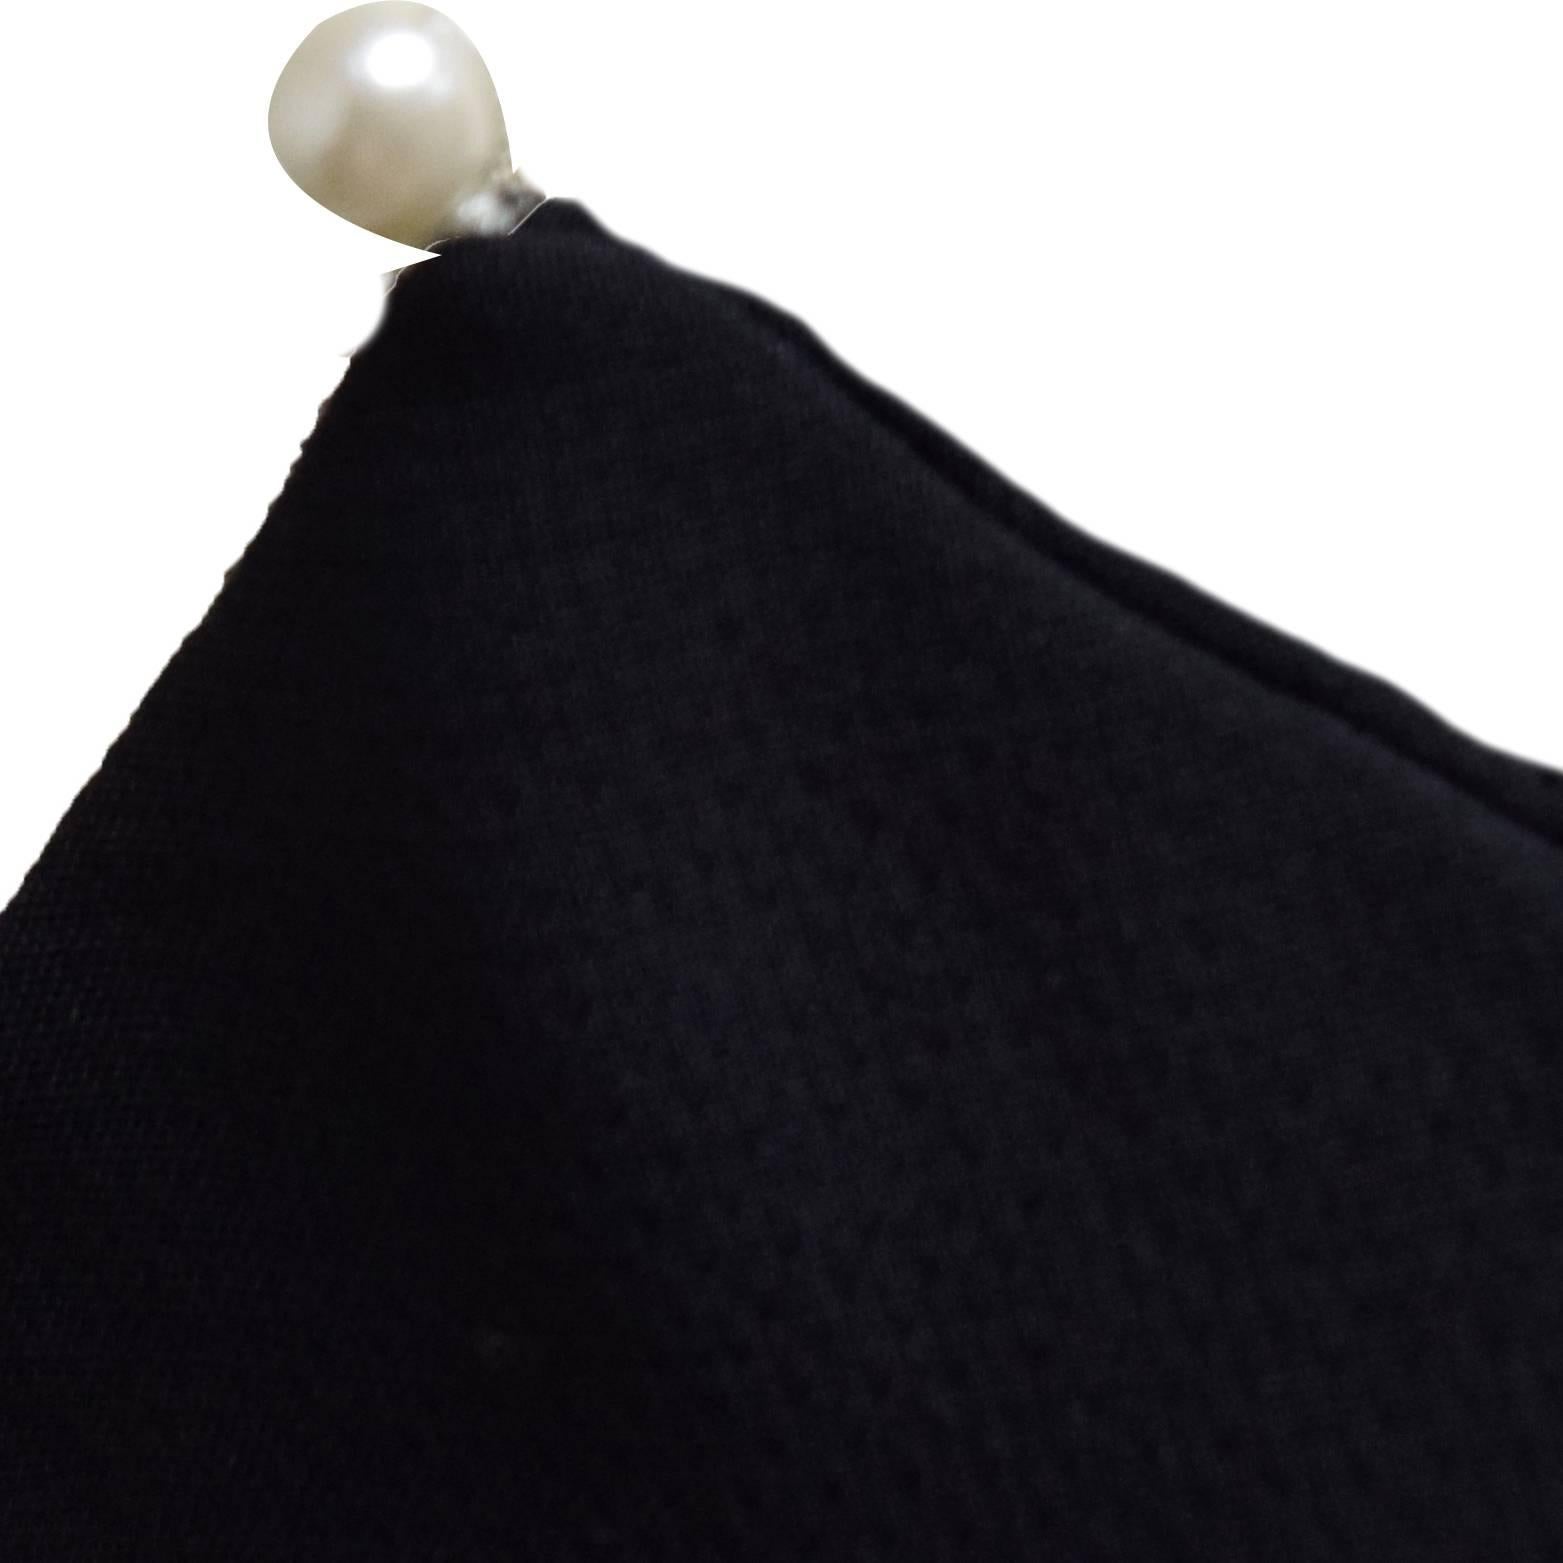 Charles Chang-Lima Wool Black Strapless Cocktail Dress with Freshwater Pearls In Excellent Condition For Sale In Henrico, VA